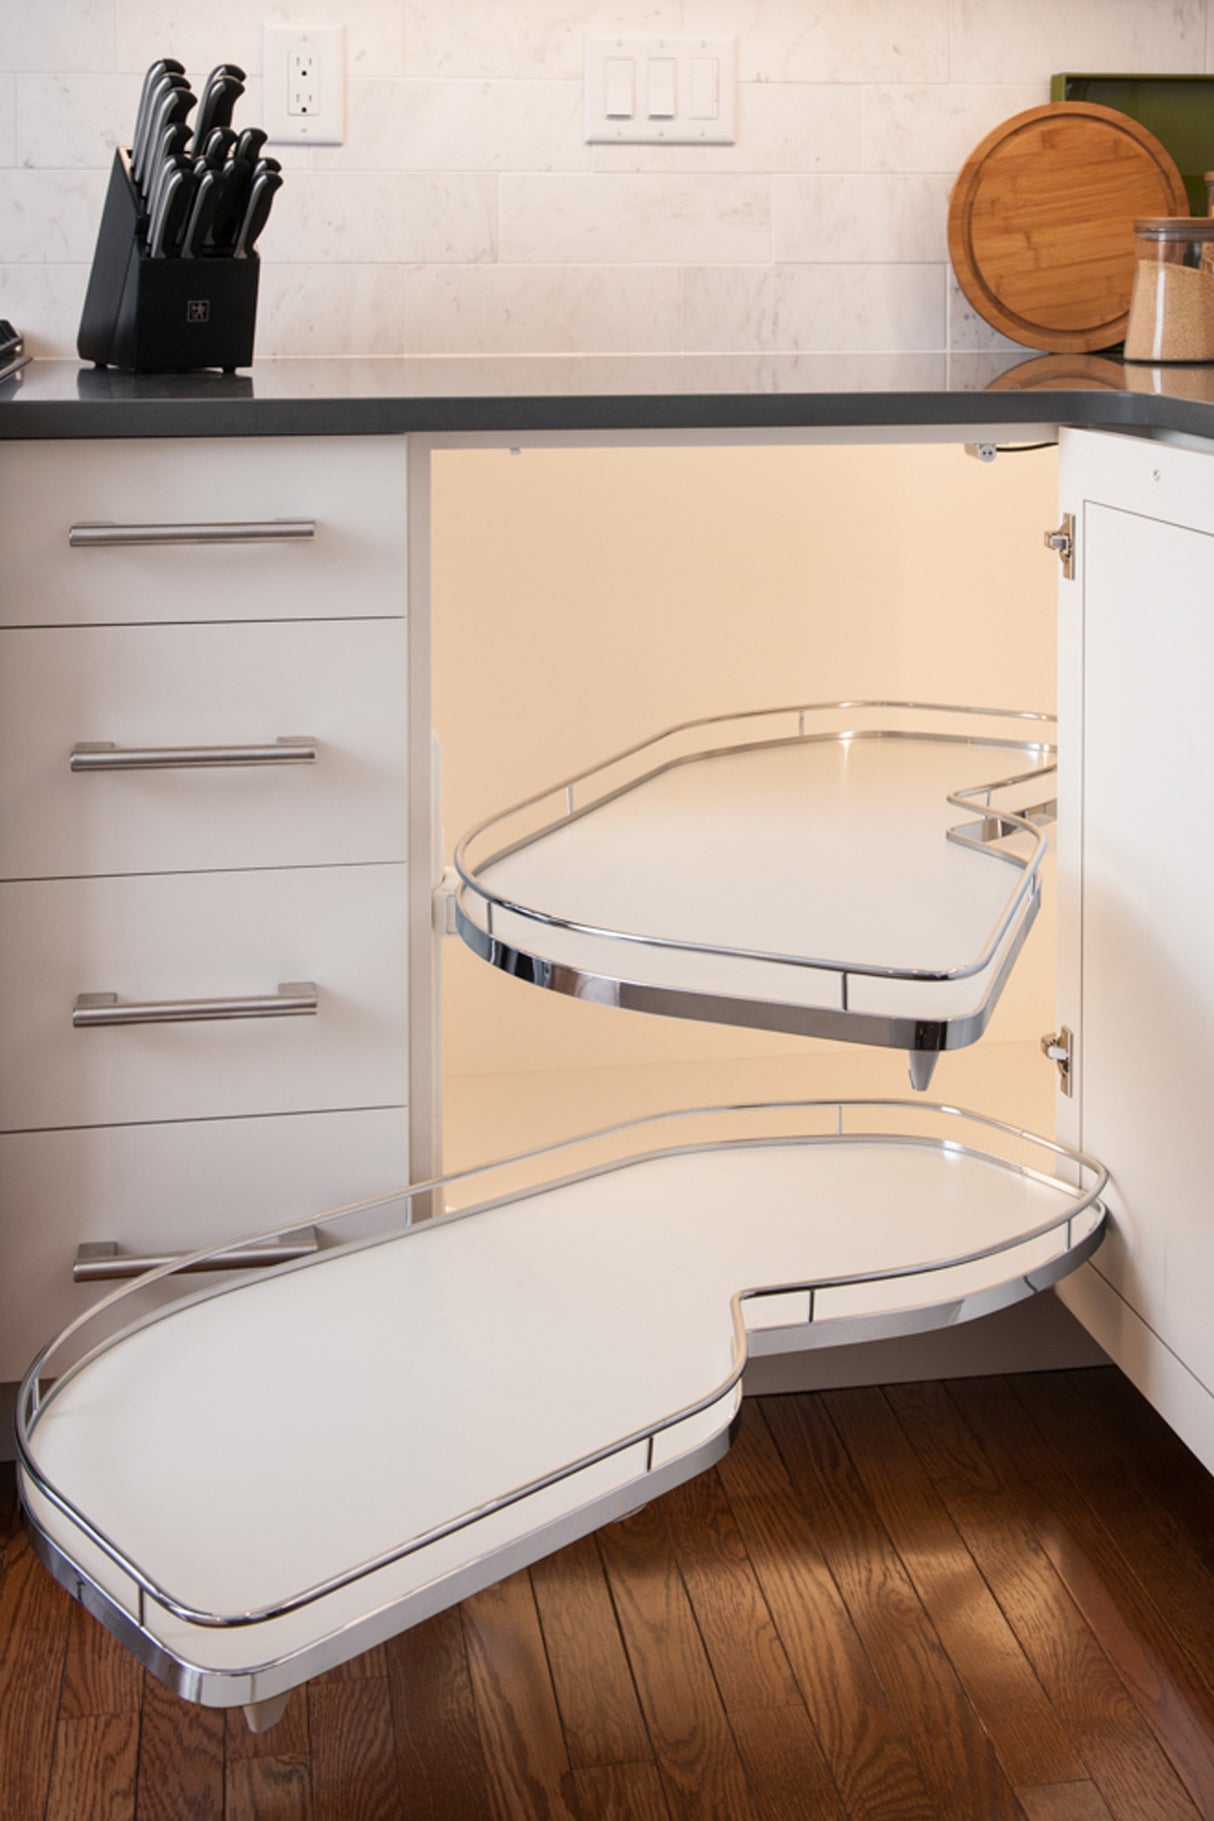 Lemans II Set 2-Shelf Lazy Susan with Soft-Close for Blind Base Corner Cabinets White and Chrome